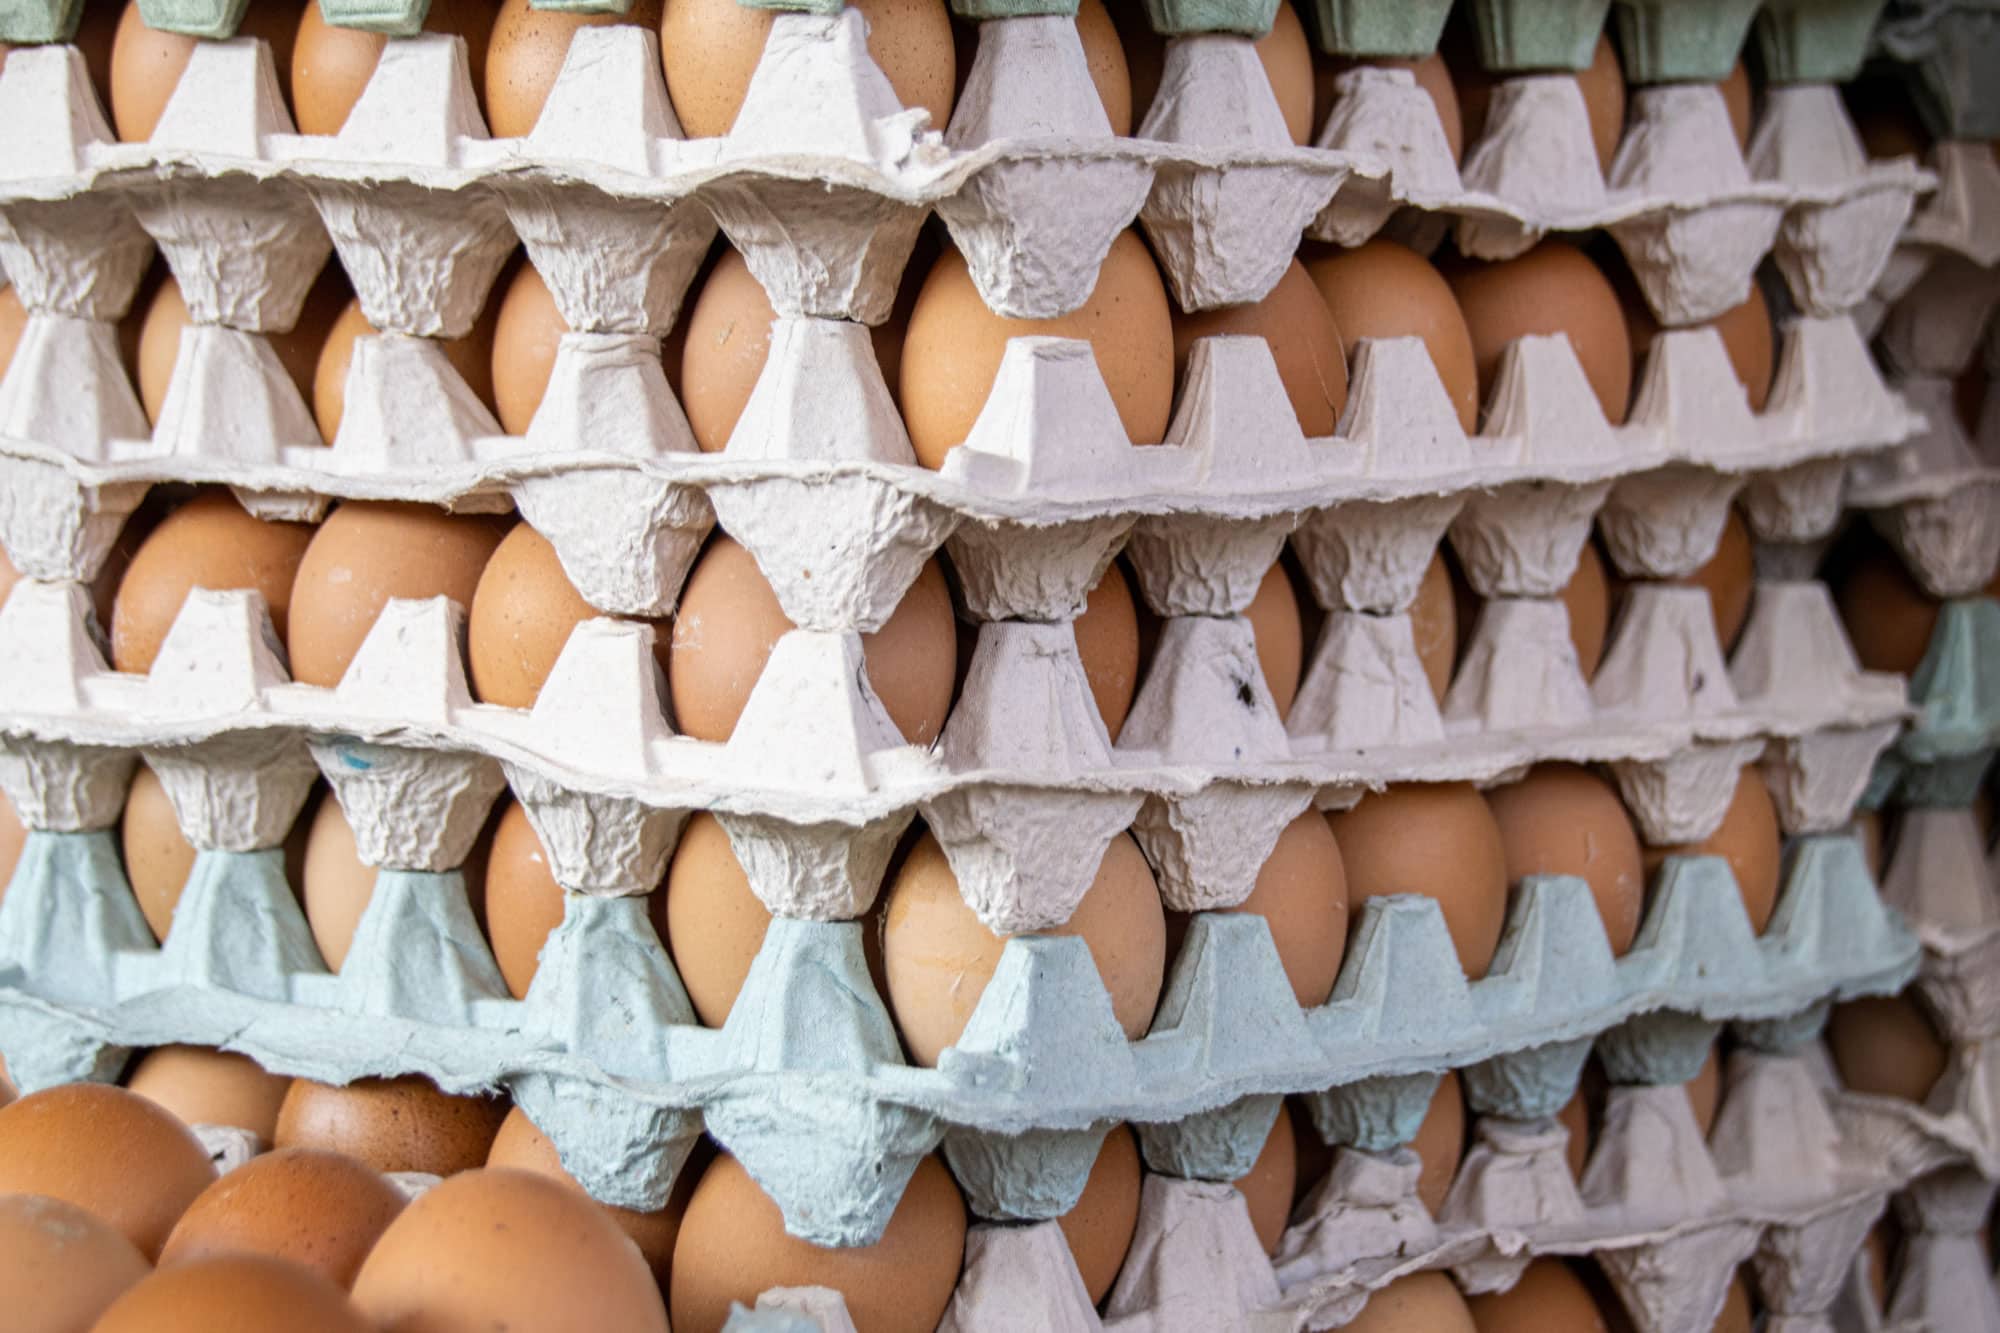 Brown eggs stacked in flat cartons